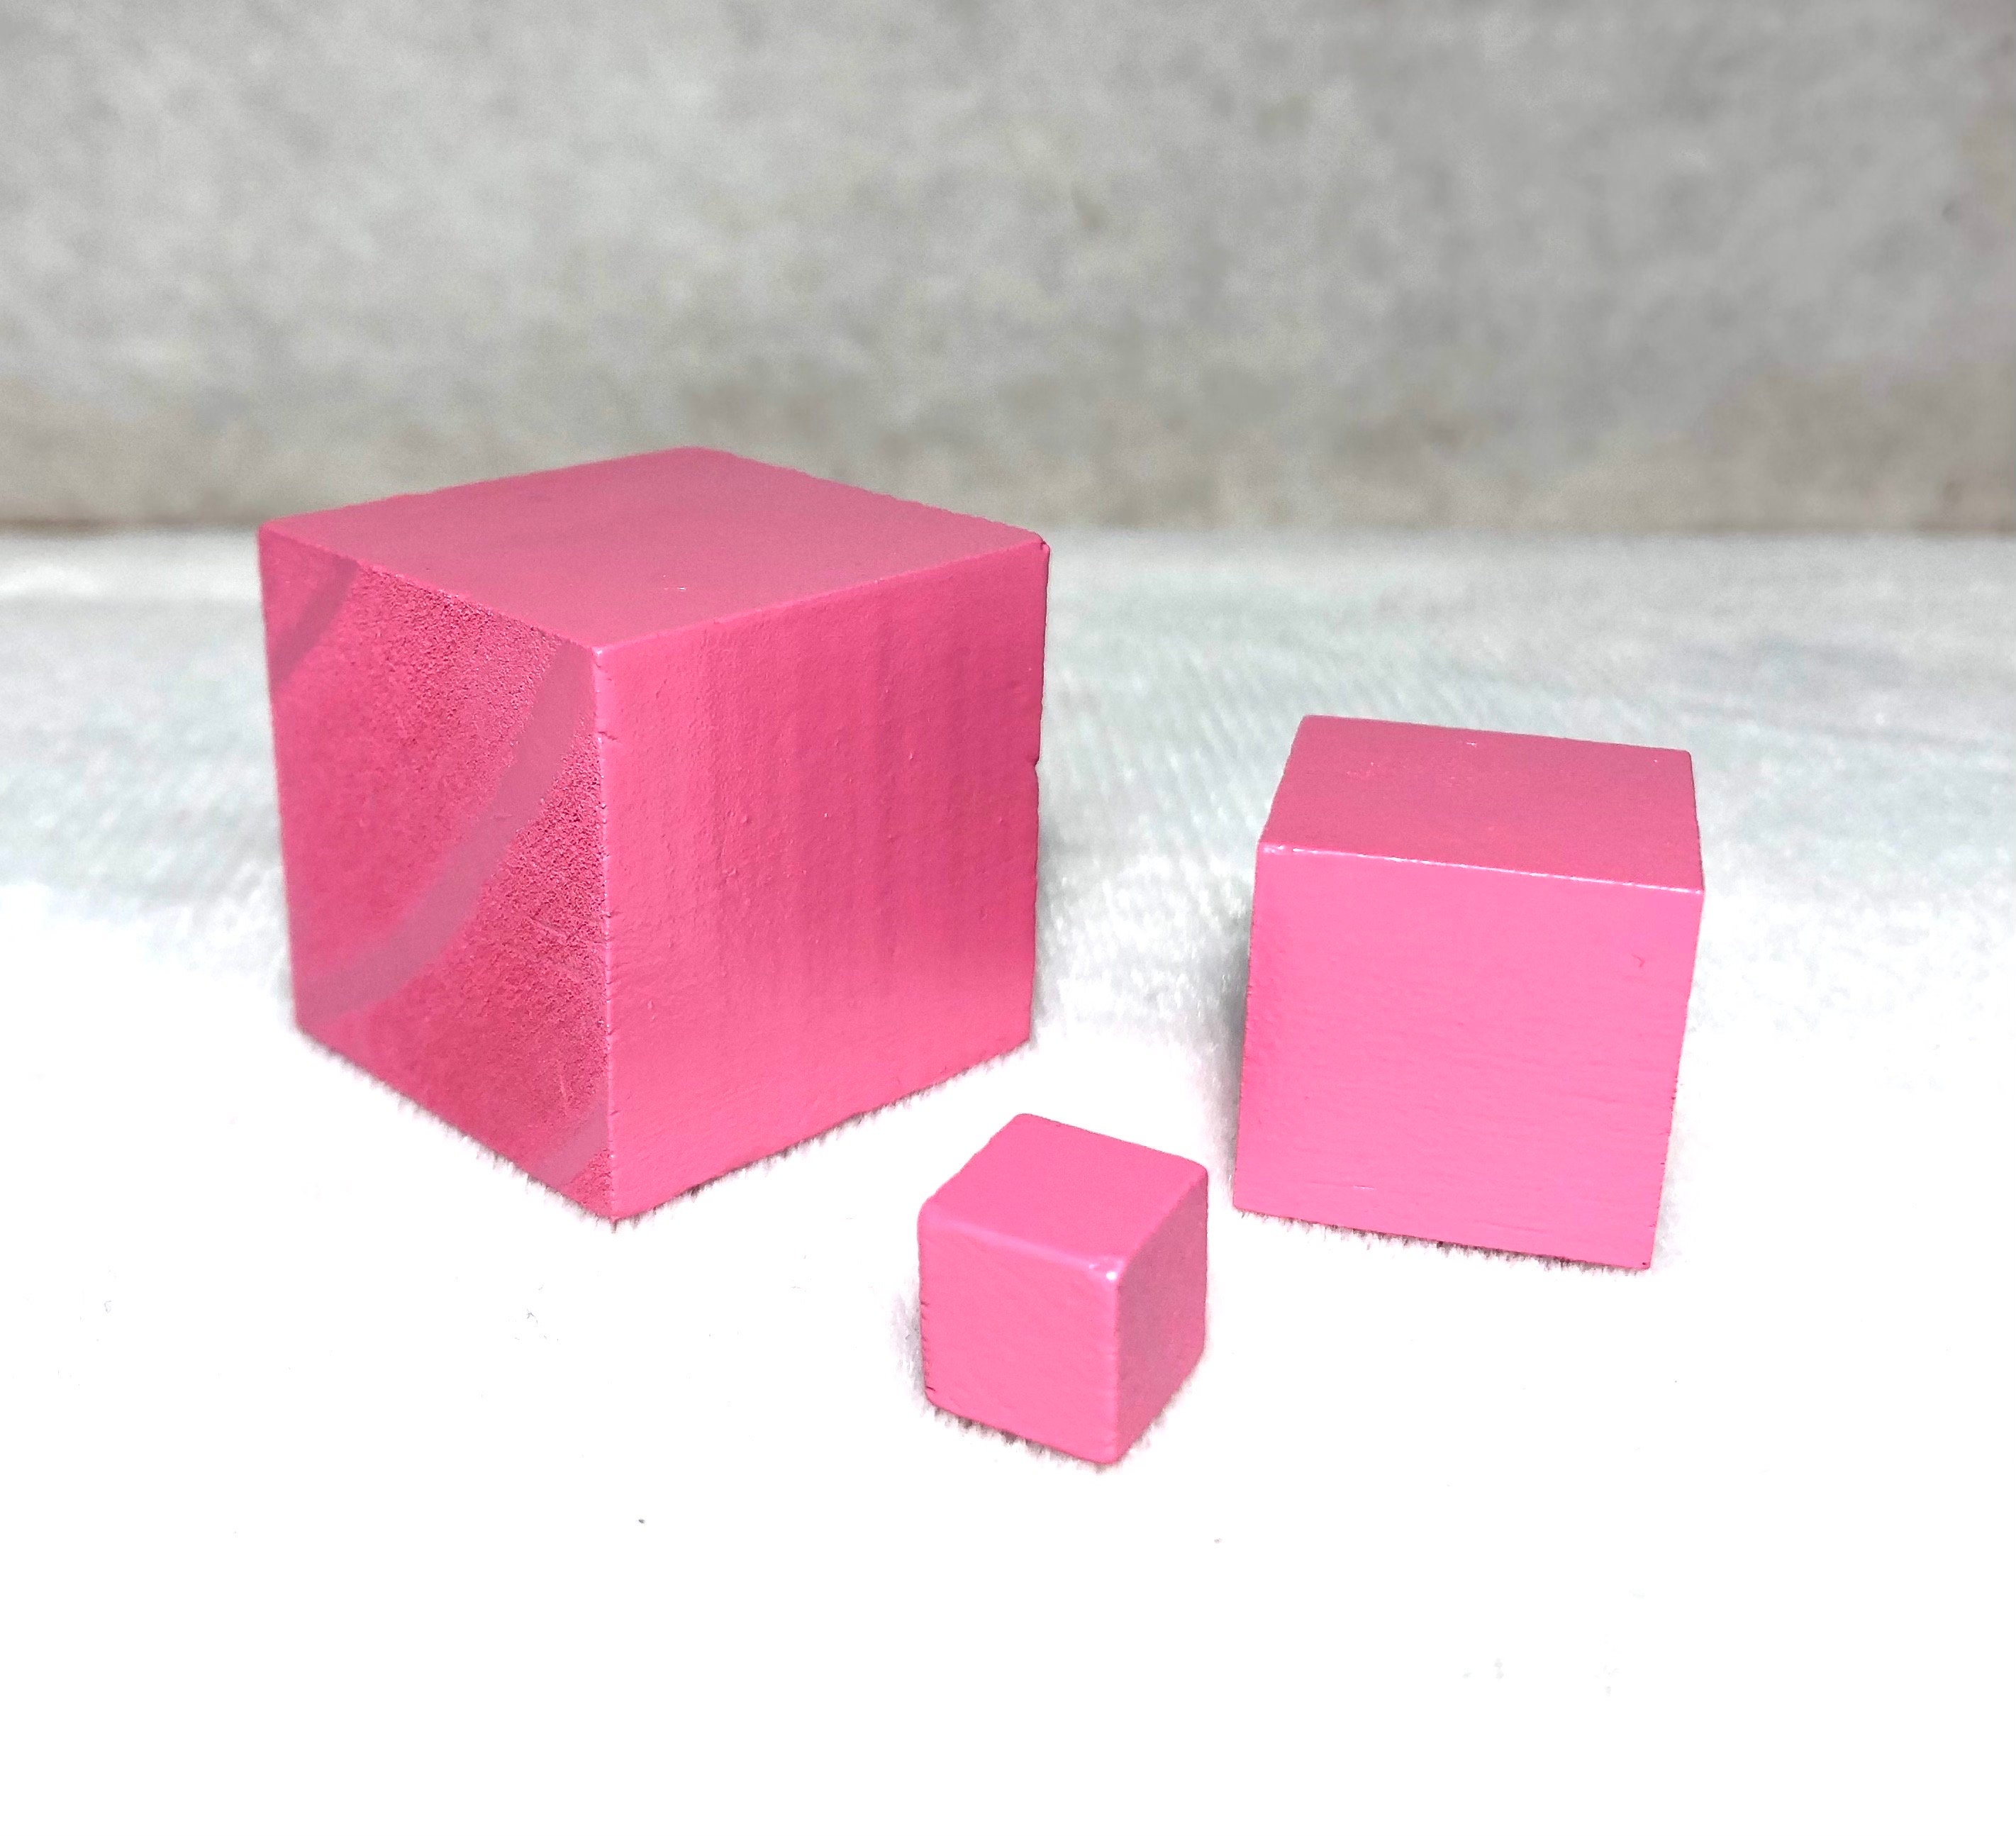 6 X 6 X 6 Foam Pit Cubes, Blocks for Gymnastics, Freerunning and